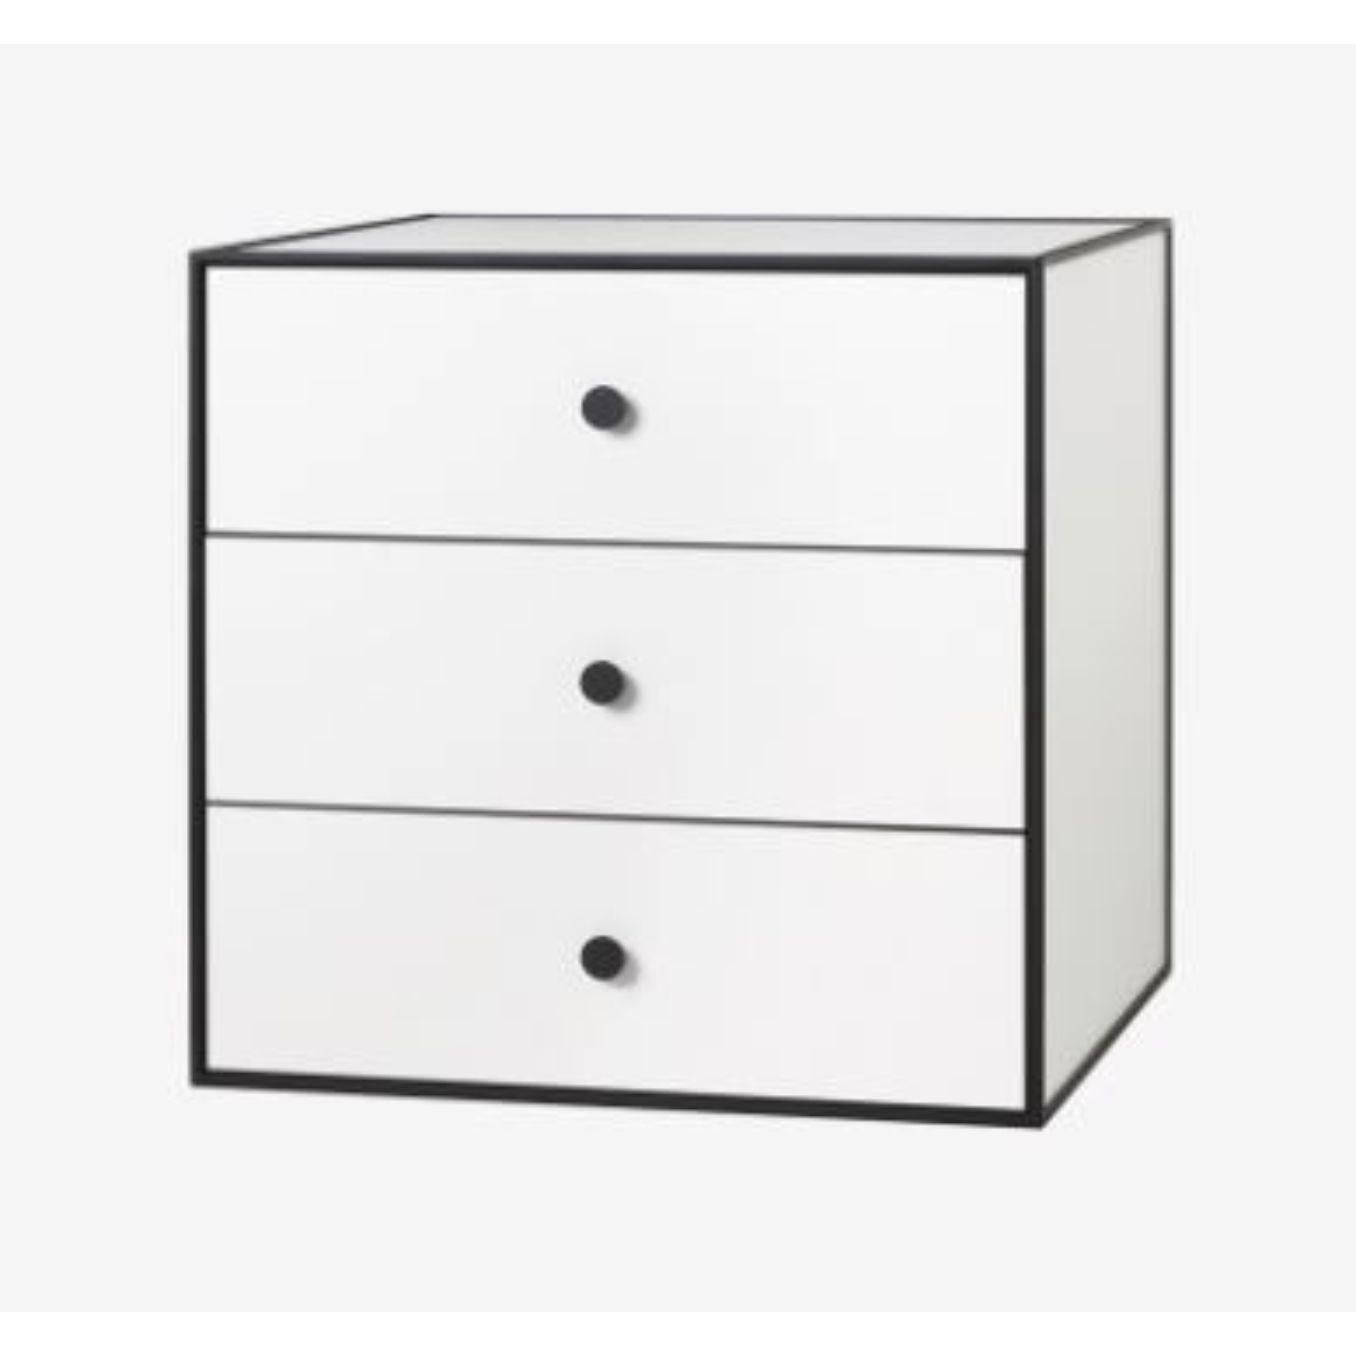 49 White frame box with 3 drawers by Lassen
Dimensions: D 49 x W 42 x H 49 cm 
Materials: finér, melamin, melamin, melamine, metal, veneer
Also available in different colours and dimensions. 
Weight: 24 Kg


By Lassen is a Danish design brand